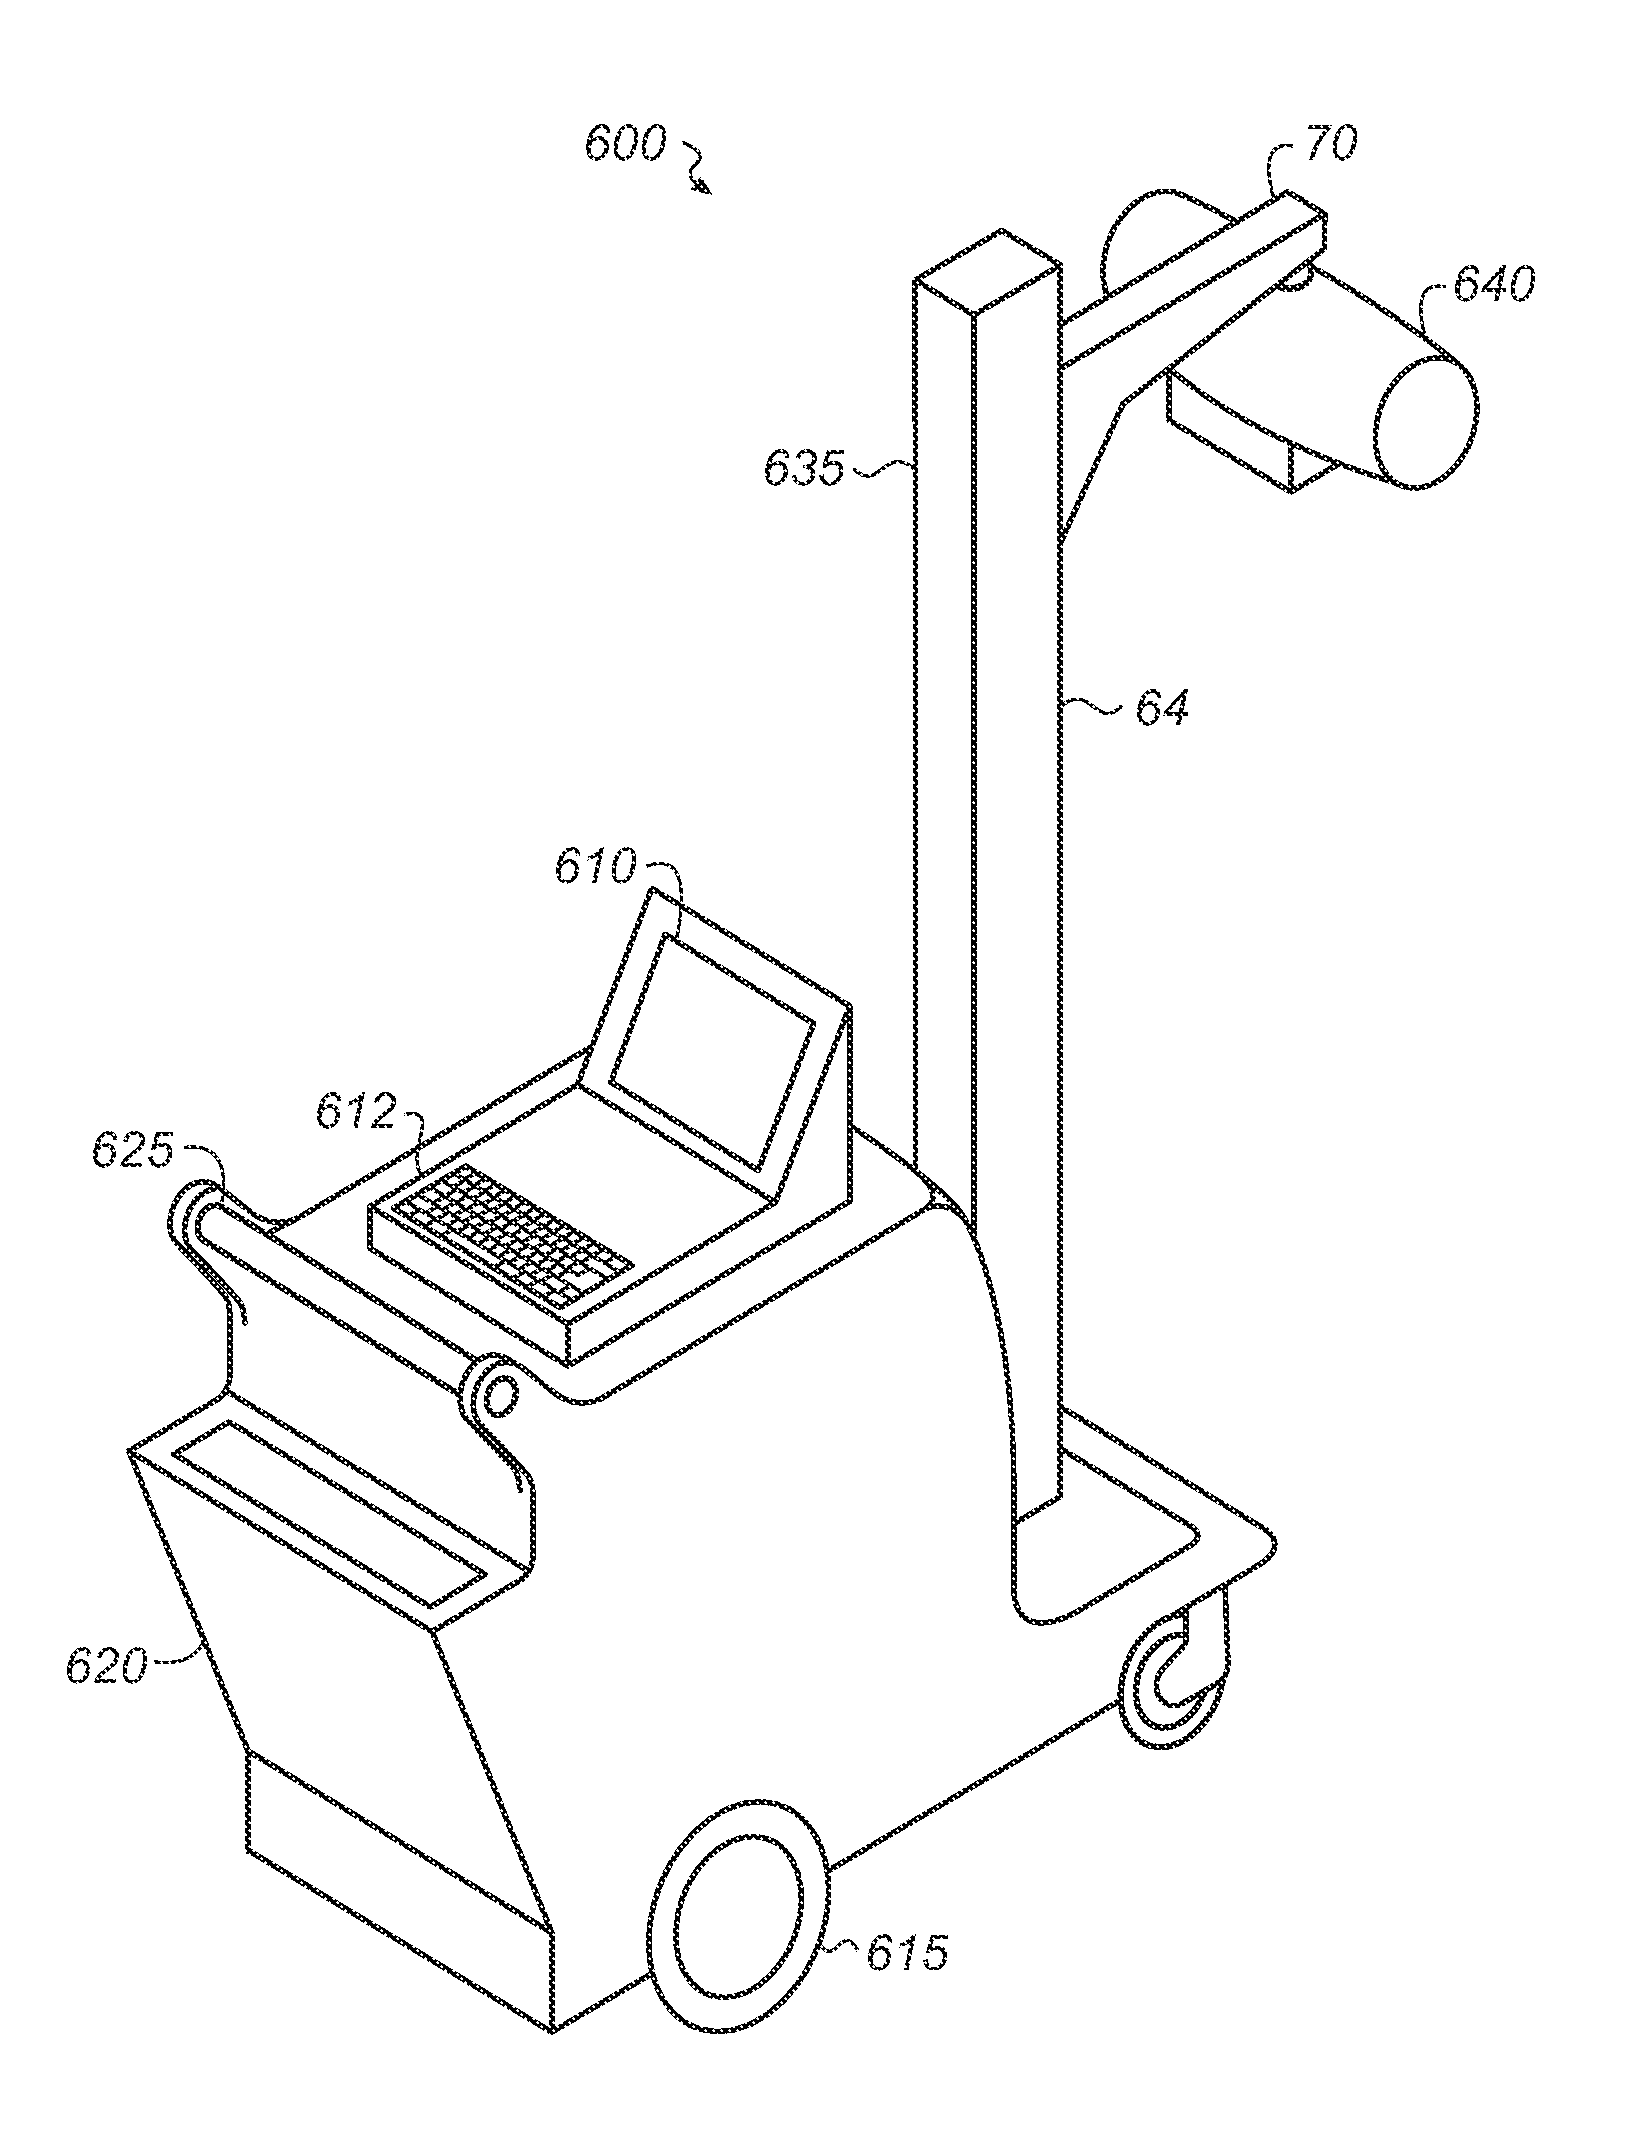 Counterweight for mobile x-ray device